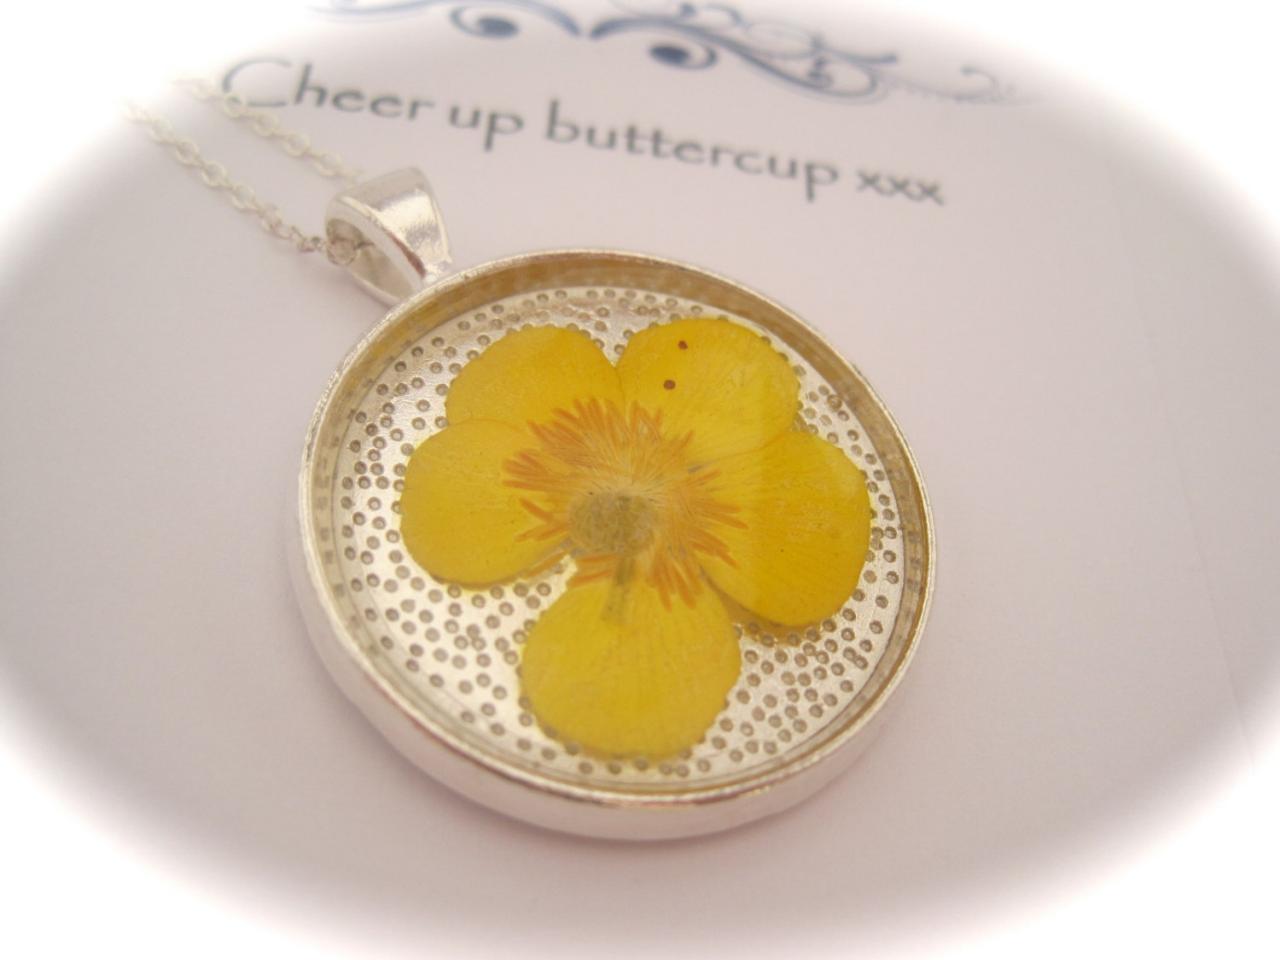 Memories Of Buttercups In The Garden - A Real Buttercup Memory Necklace